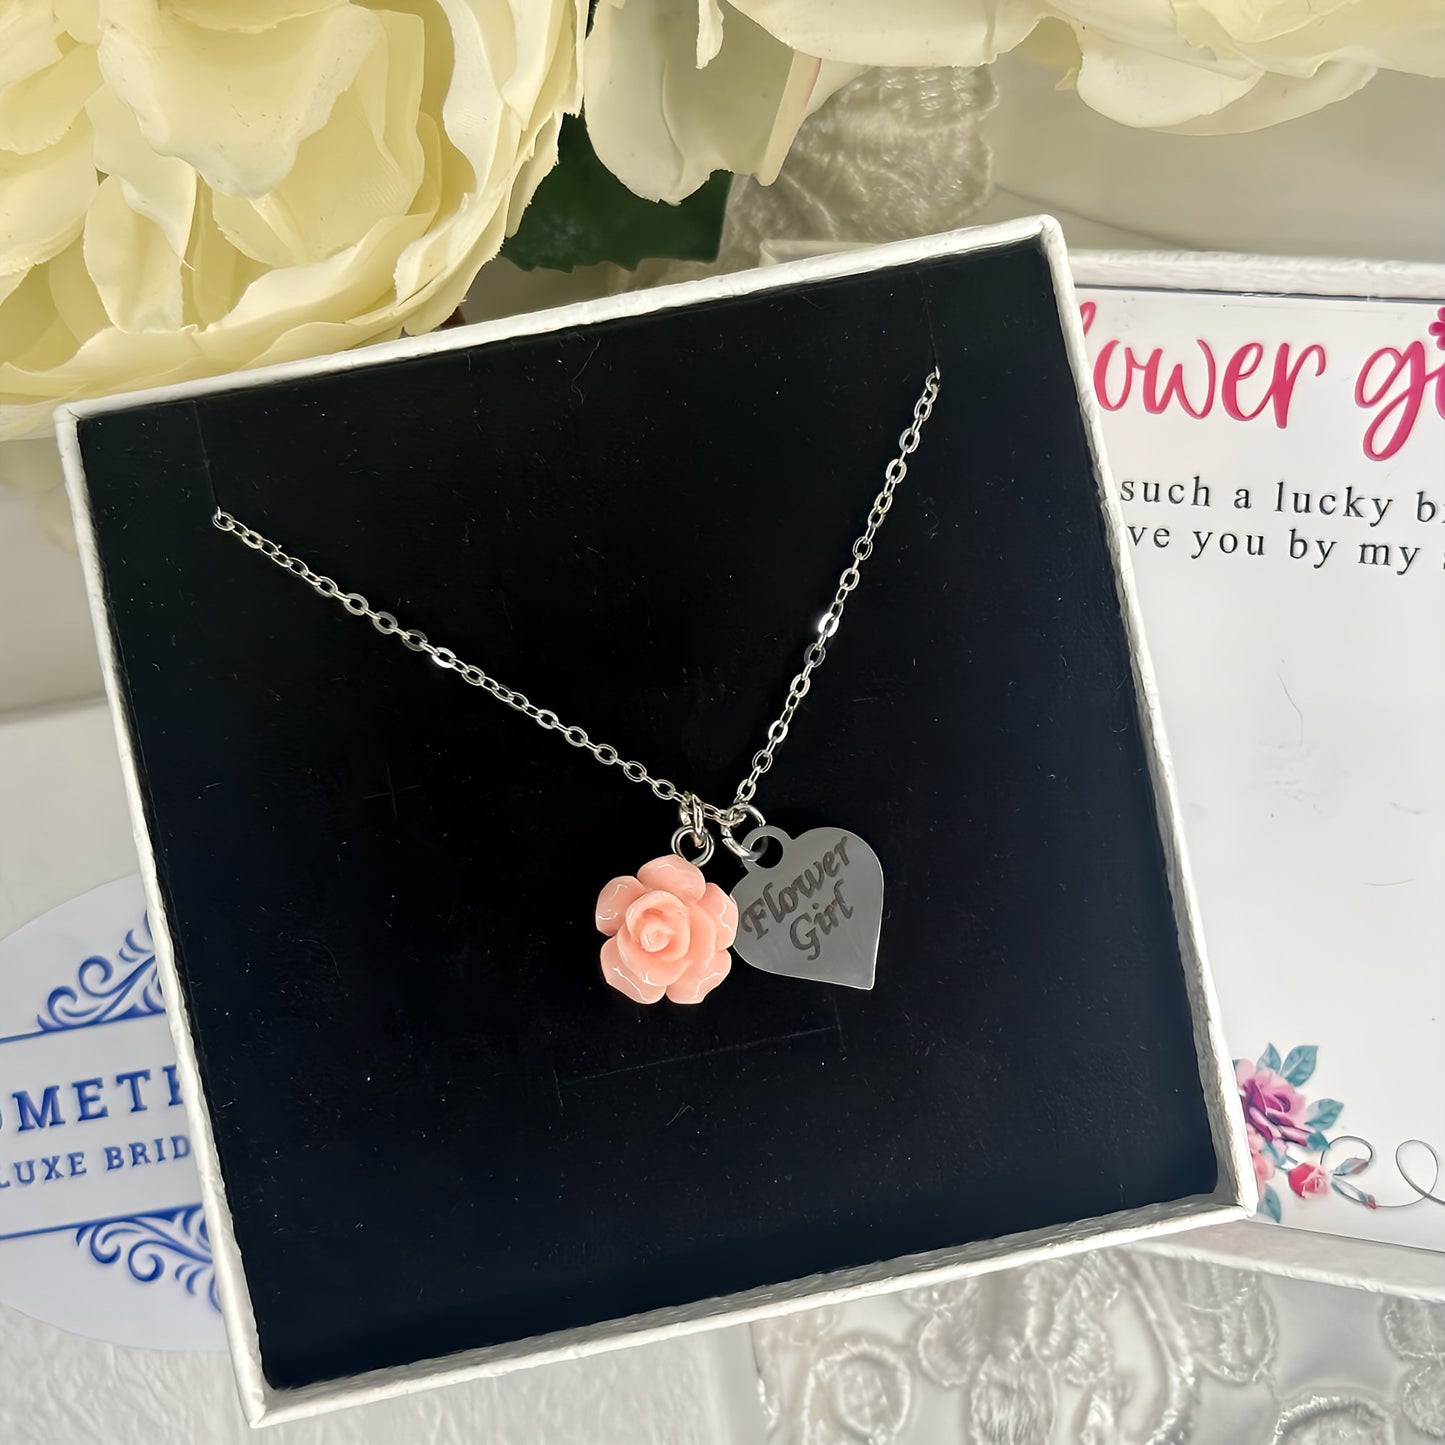 FLOWERGIRL I'M LUCKY TO HAVE YOU NECKLACE